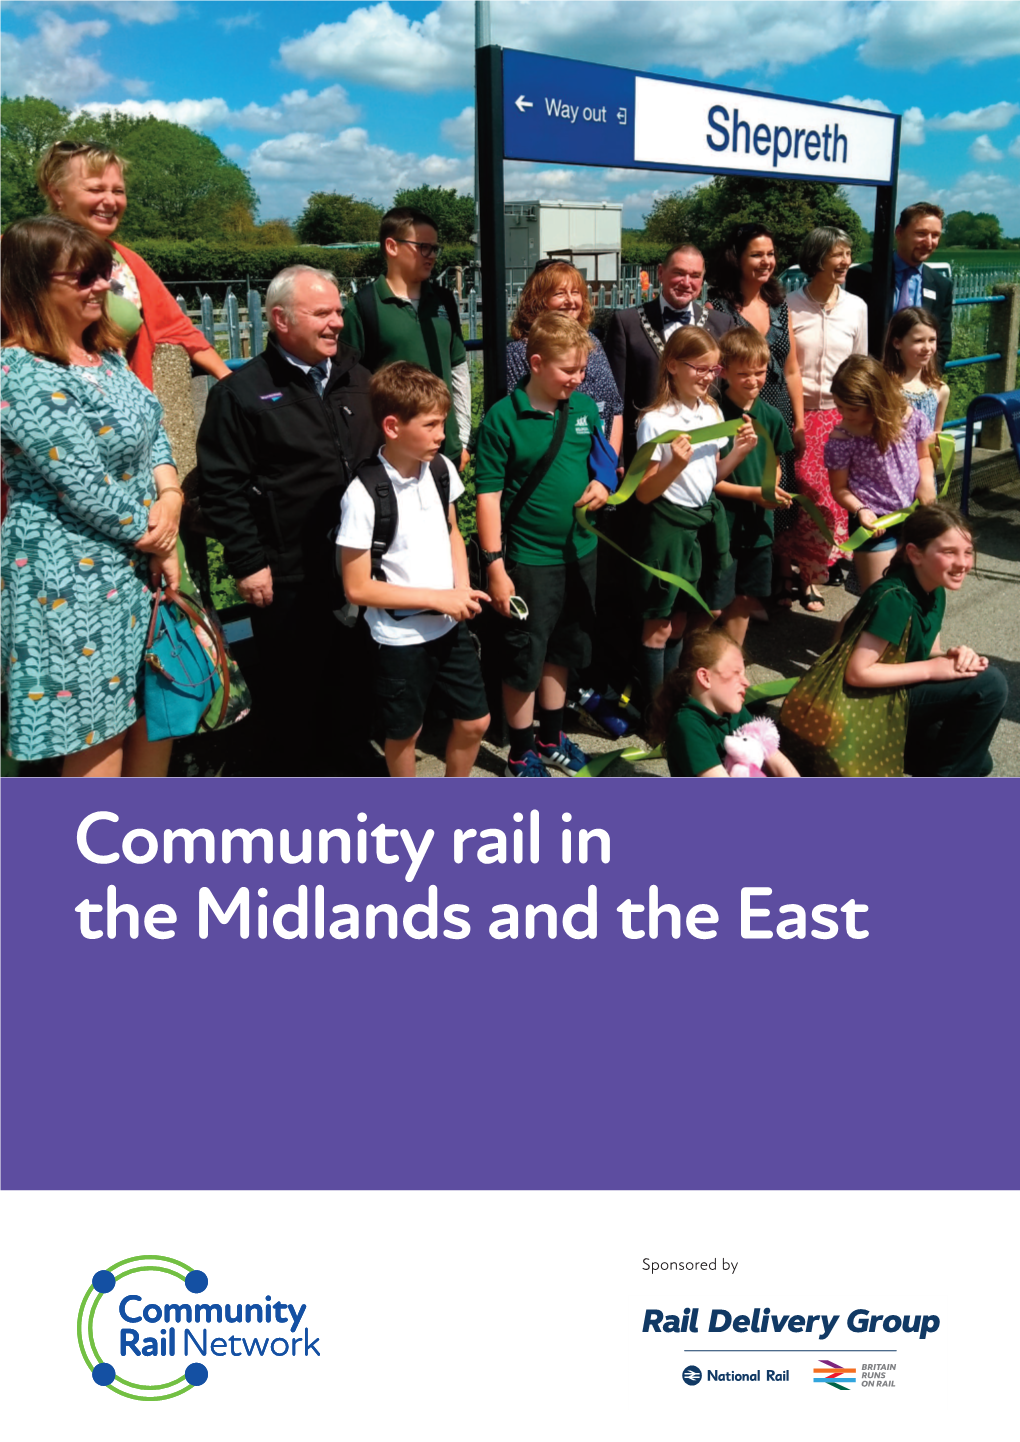 Community Rail in the Midlands and the East